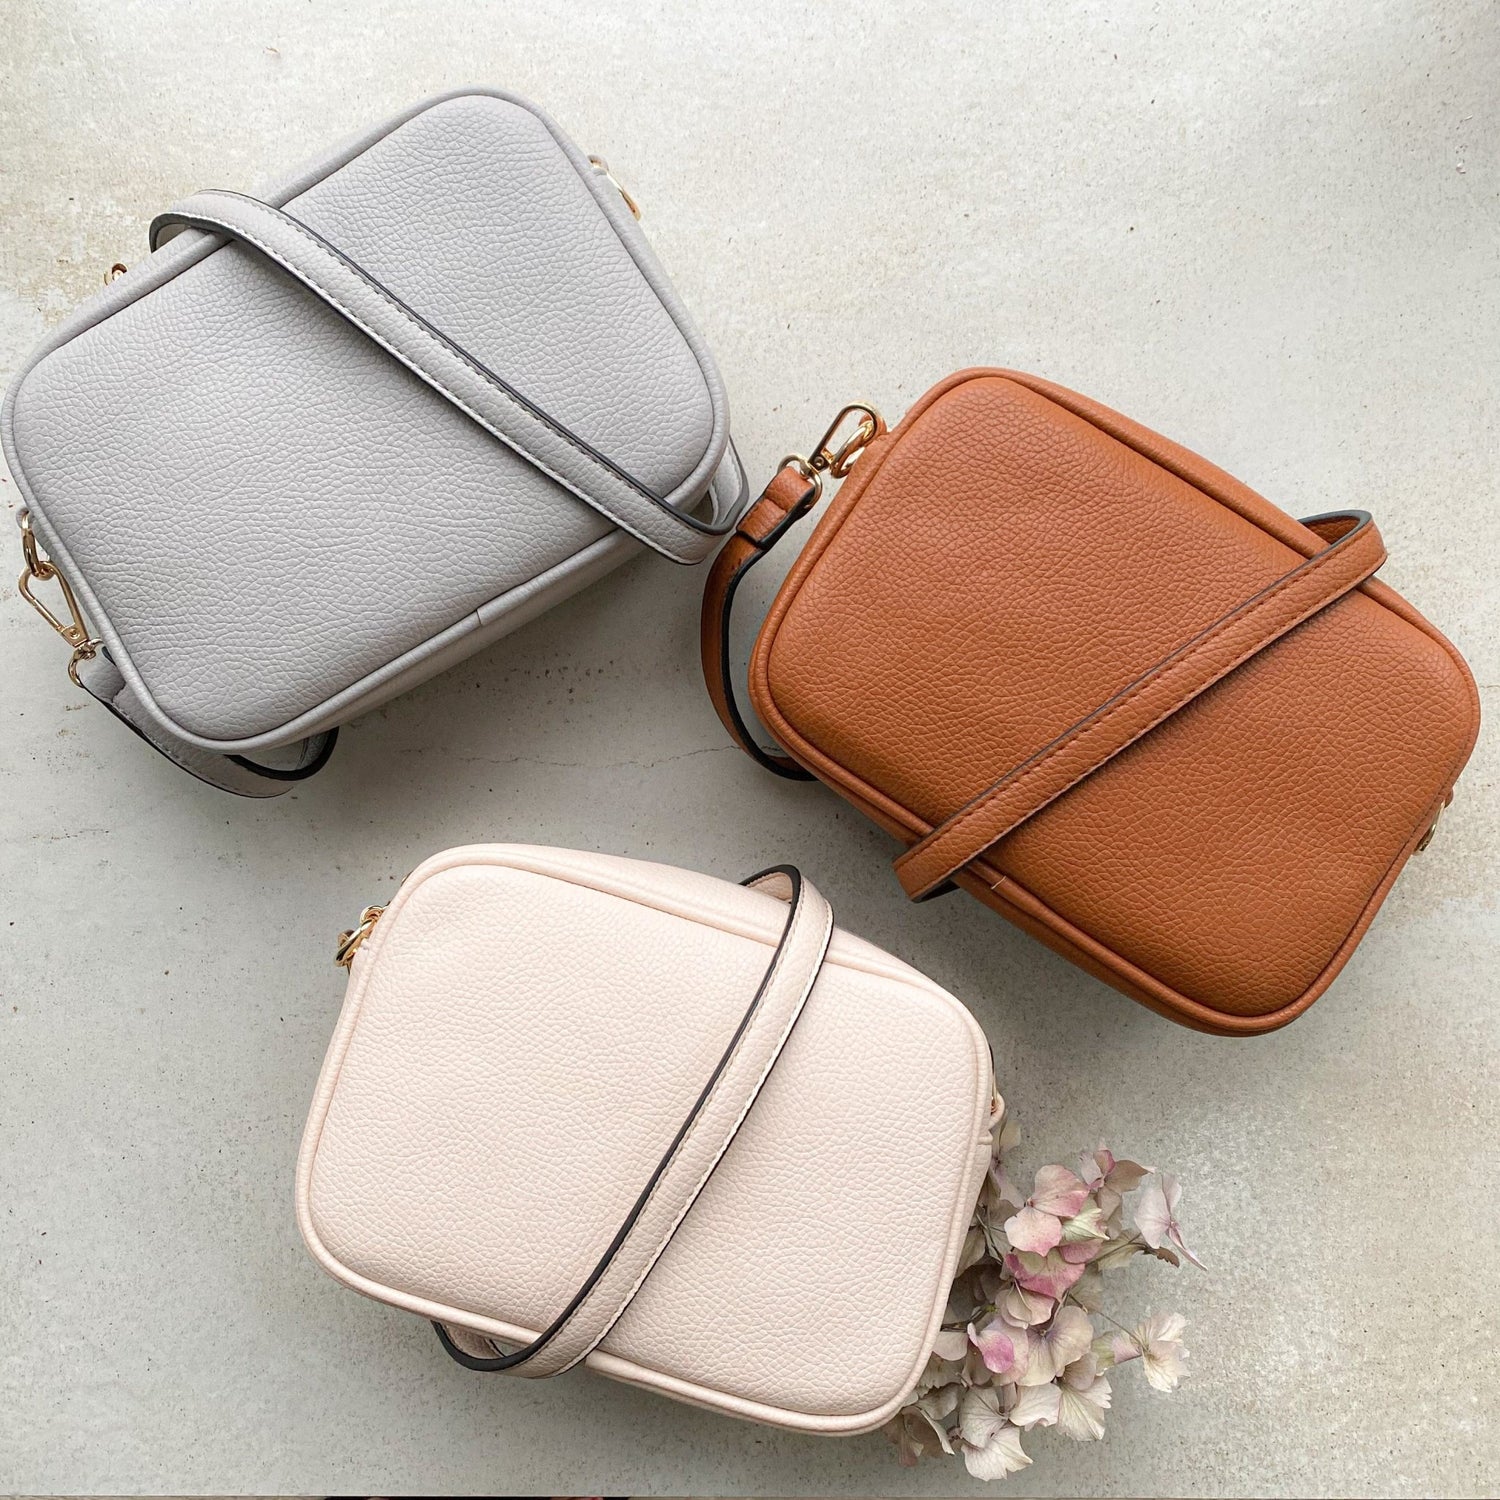 ECOPELLE BAGS - NON LEATHER - OLIVIA AND GRAY LTD